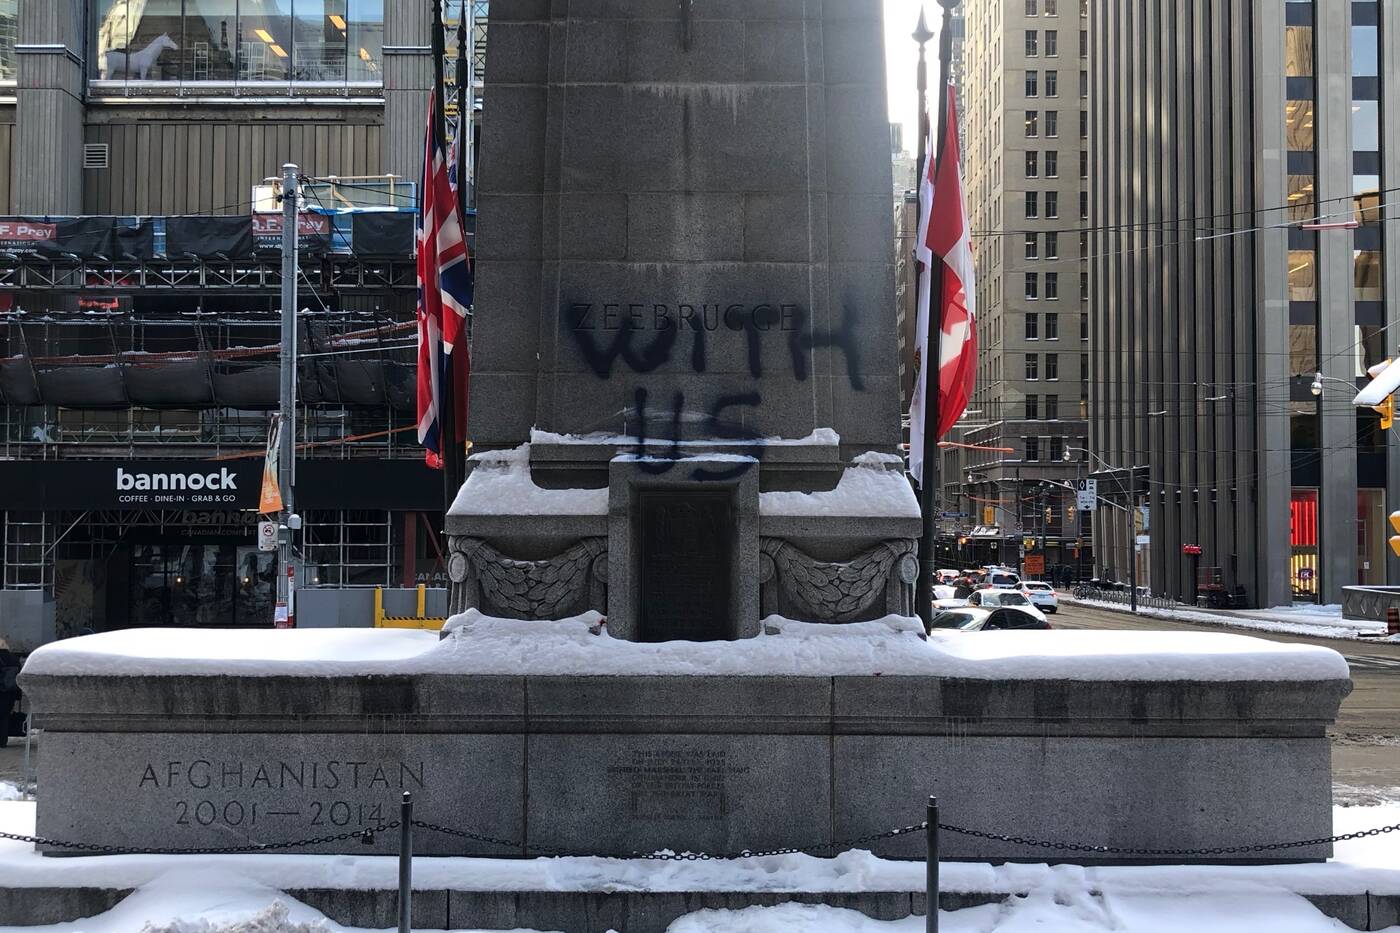 One of two phrases spray painted on the Old City Hall Cenotaph